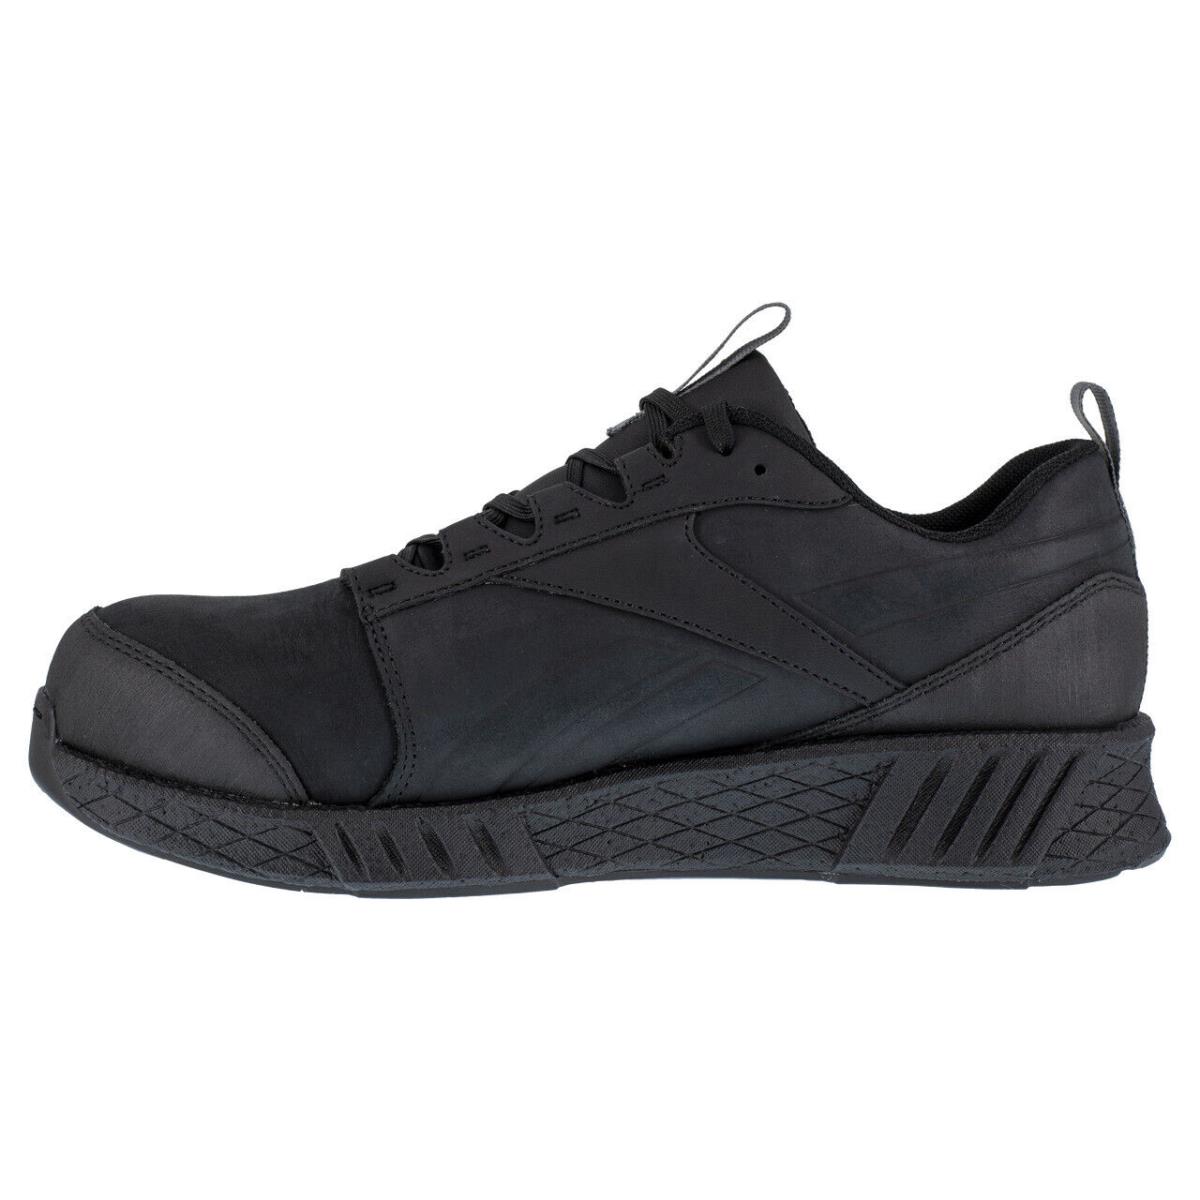 Reebok Fusion Formidable Work Men`s Athletic Work Shoe Black Boots RB4300